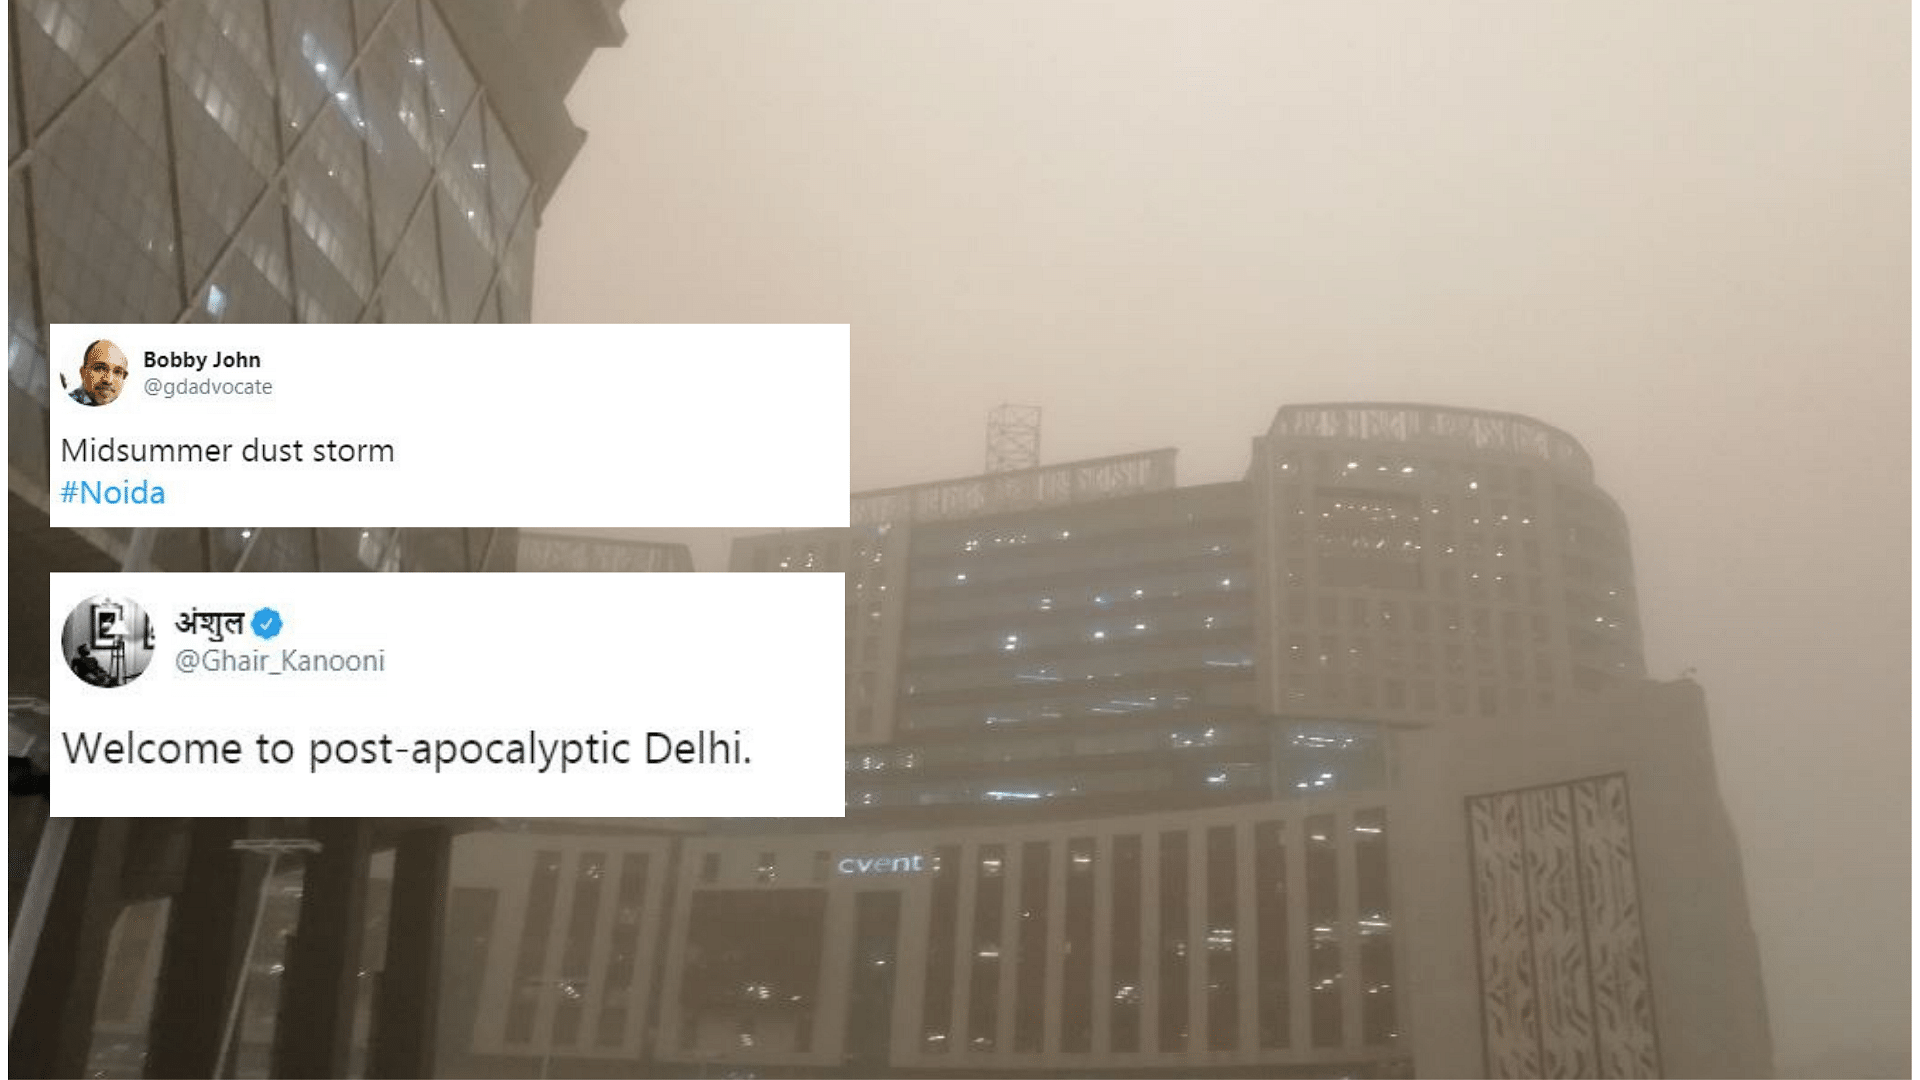 A dust storm hit Delhi and adjoining areas on Wednesday evening.